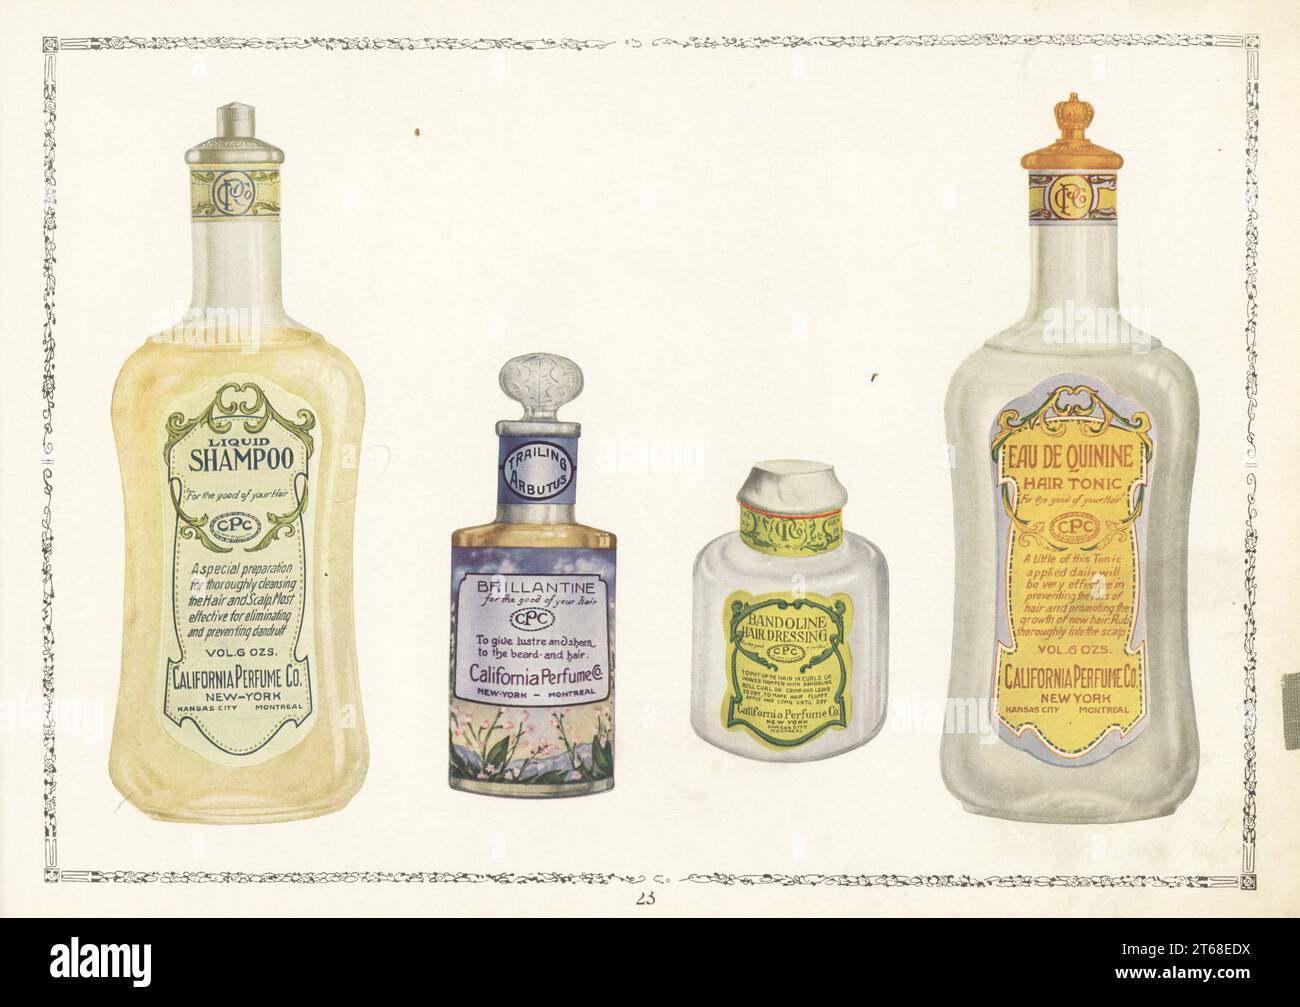 CPC brand cosmetics from 1926. Bottle of Liquid Shampoo, bottle of Brillantine hair dressing, bottle of Bandoline Hair Dressing and bottle of Eau de Quinine hair tonic. Chromolithograph by an unknown artist from the California Perfume Company (later Avon) product catalog, New York, Kansas, Montreal, 1926. Stock Photo